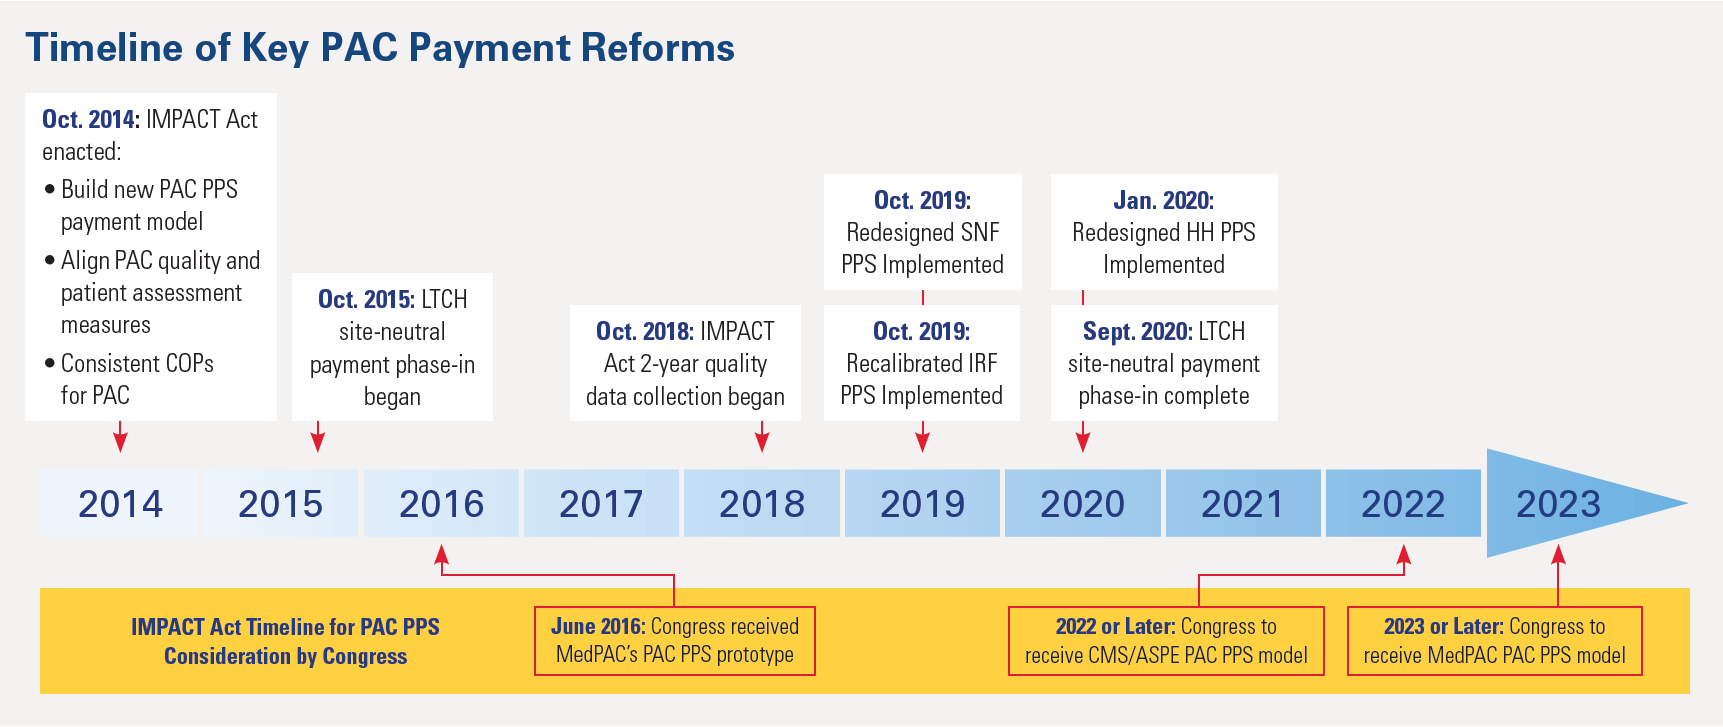 Timeline of Key PAC Payment Reforms chart